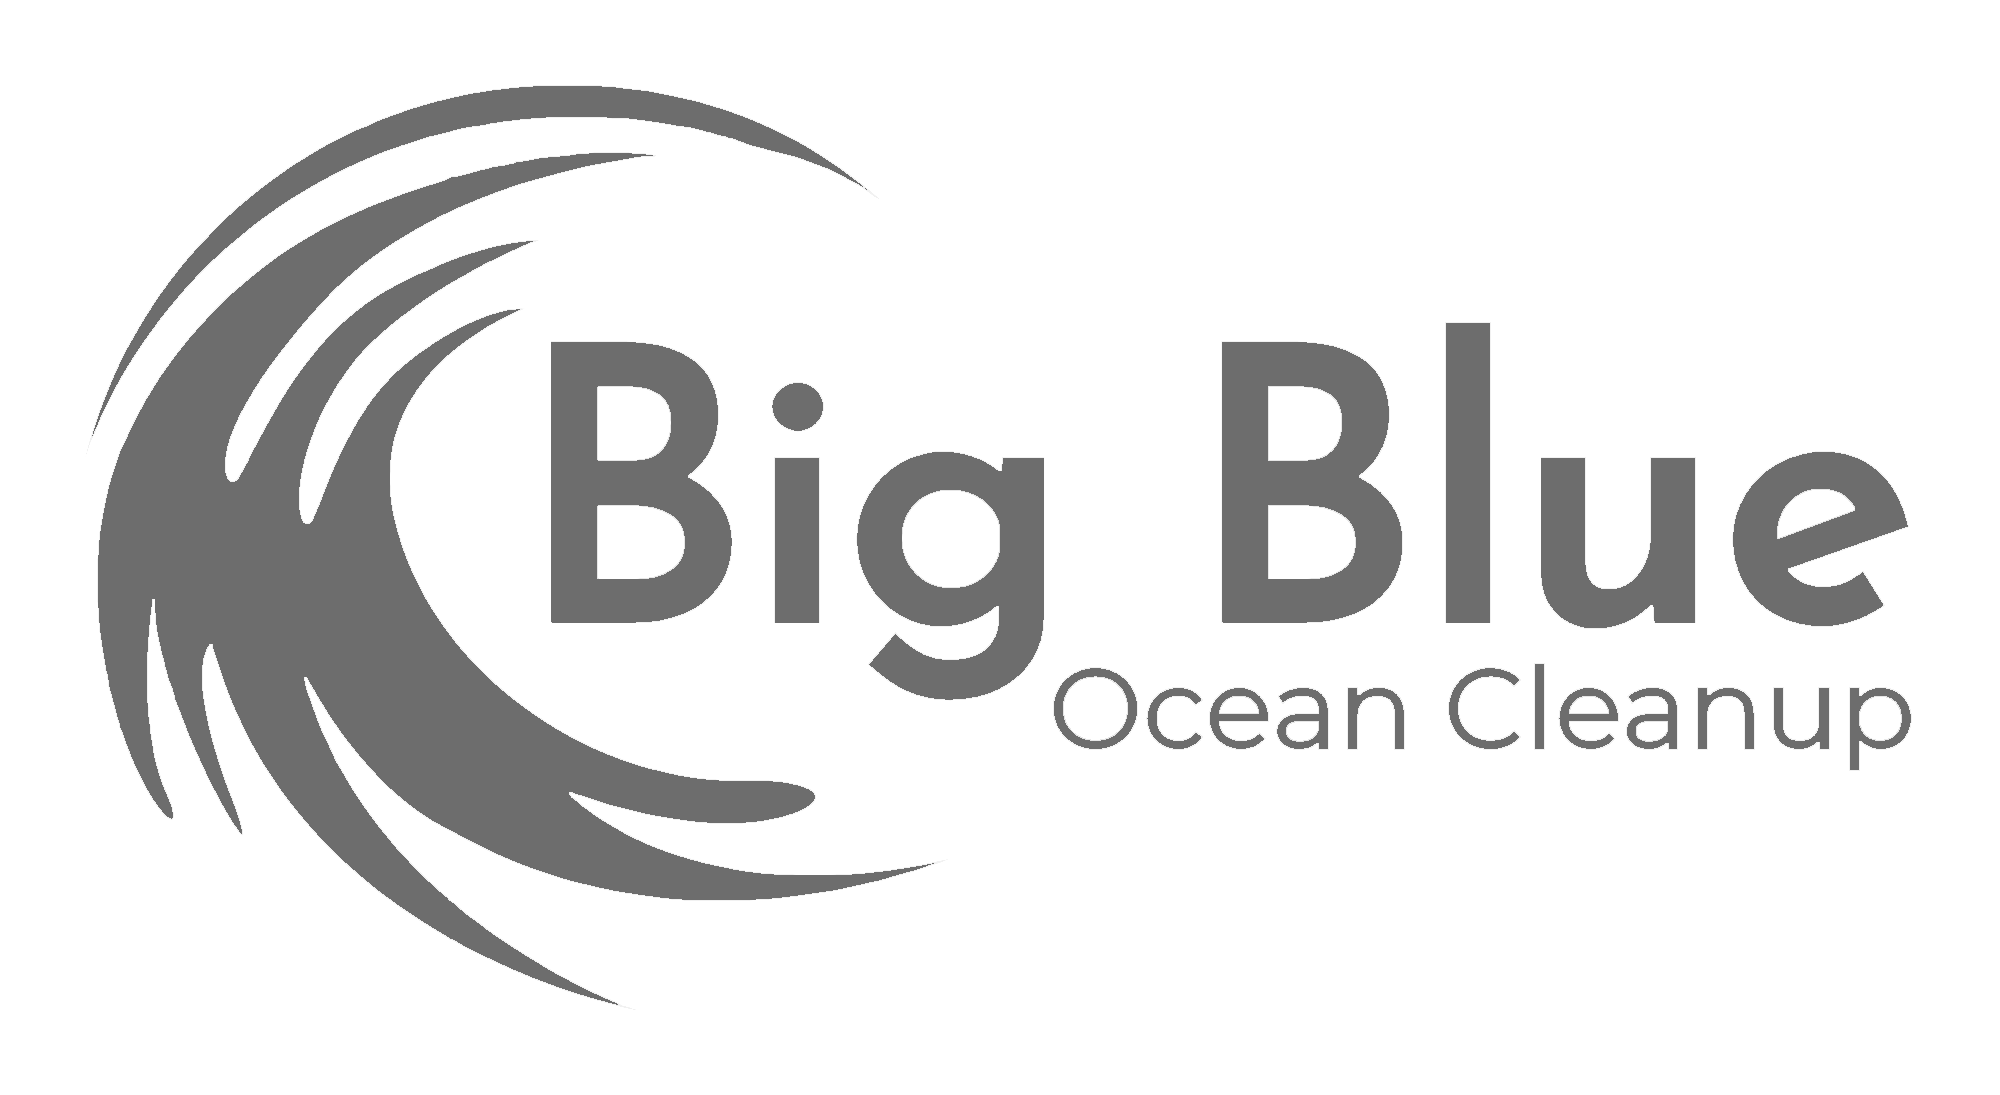 Hugo-donnithorne-tait-director-big-blue-ocean-cleanup-wildlife-photography